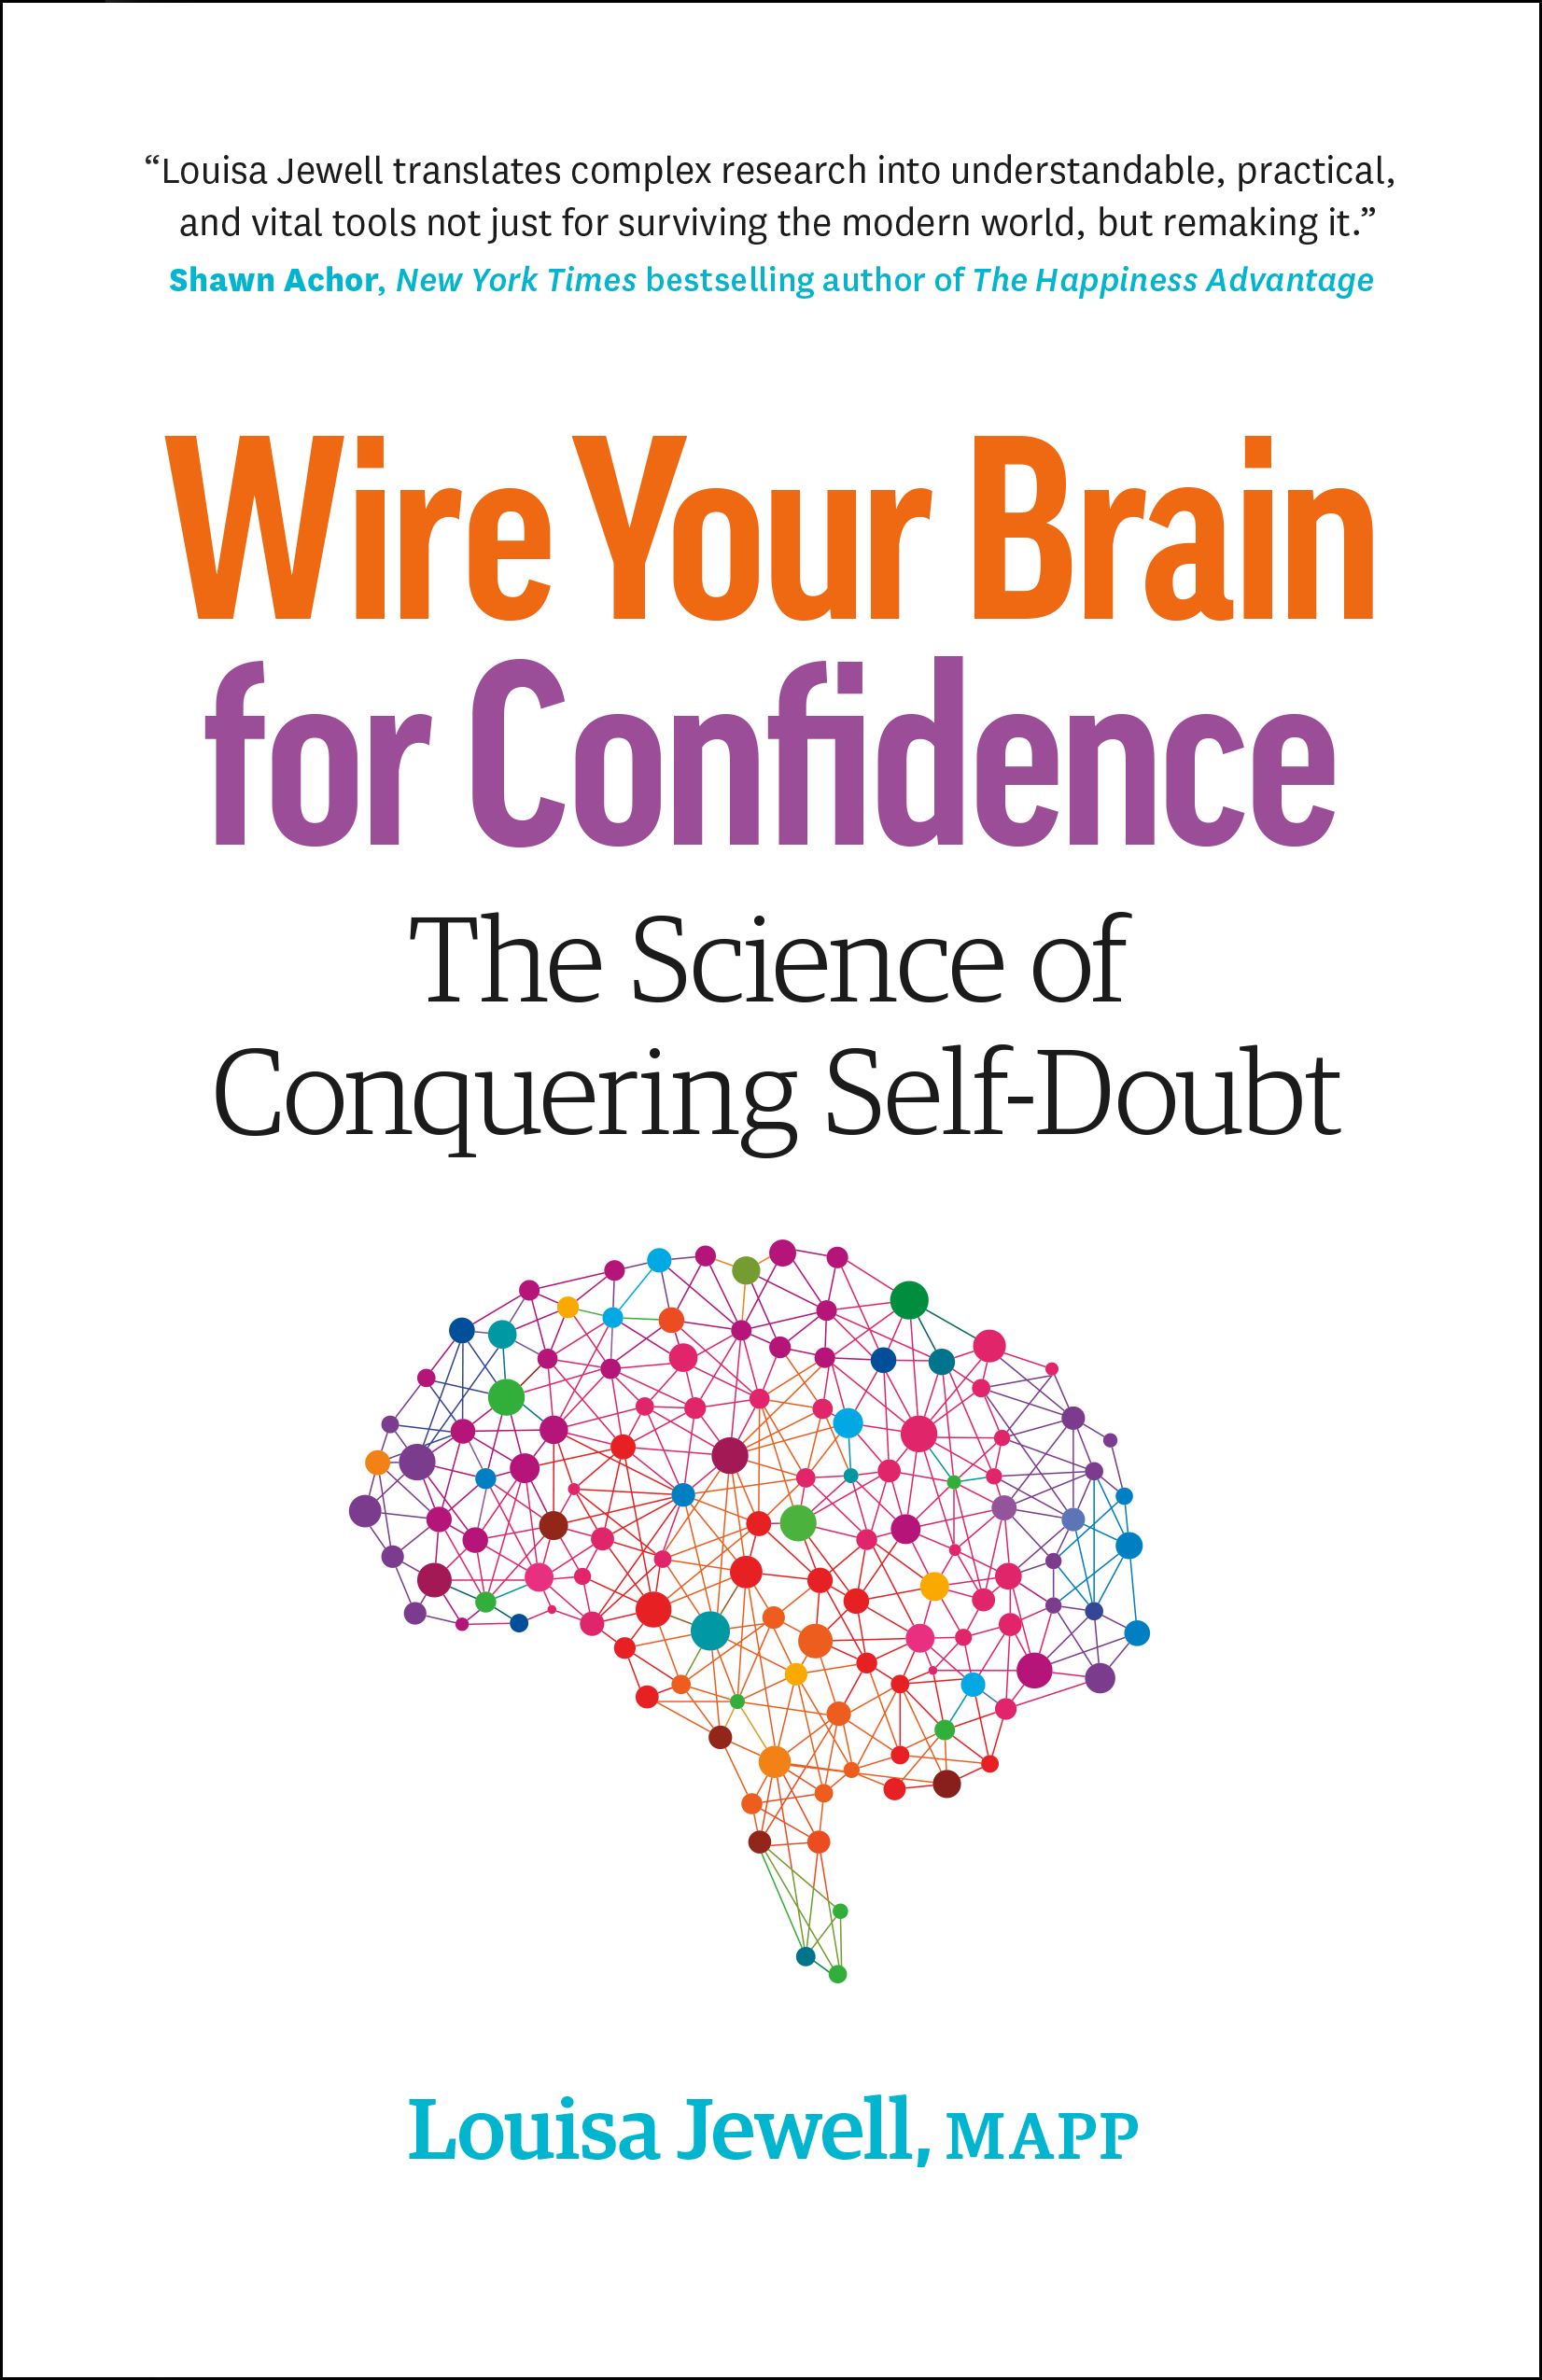 Wire Your Brain for Confidence